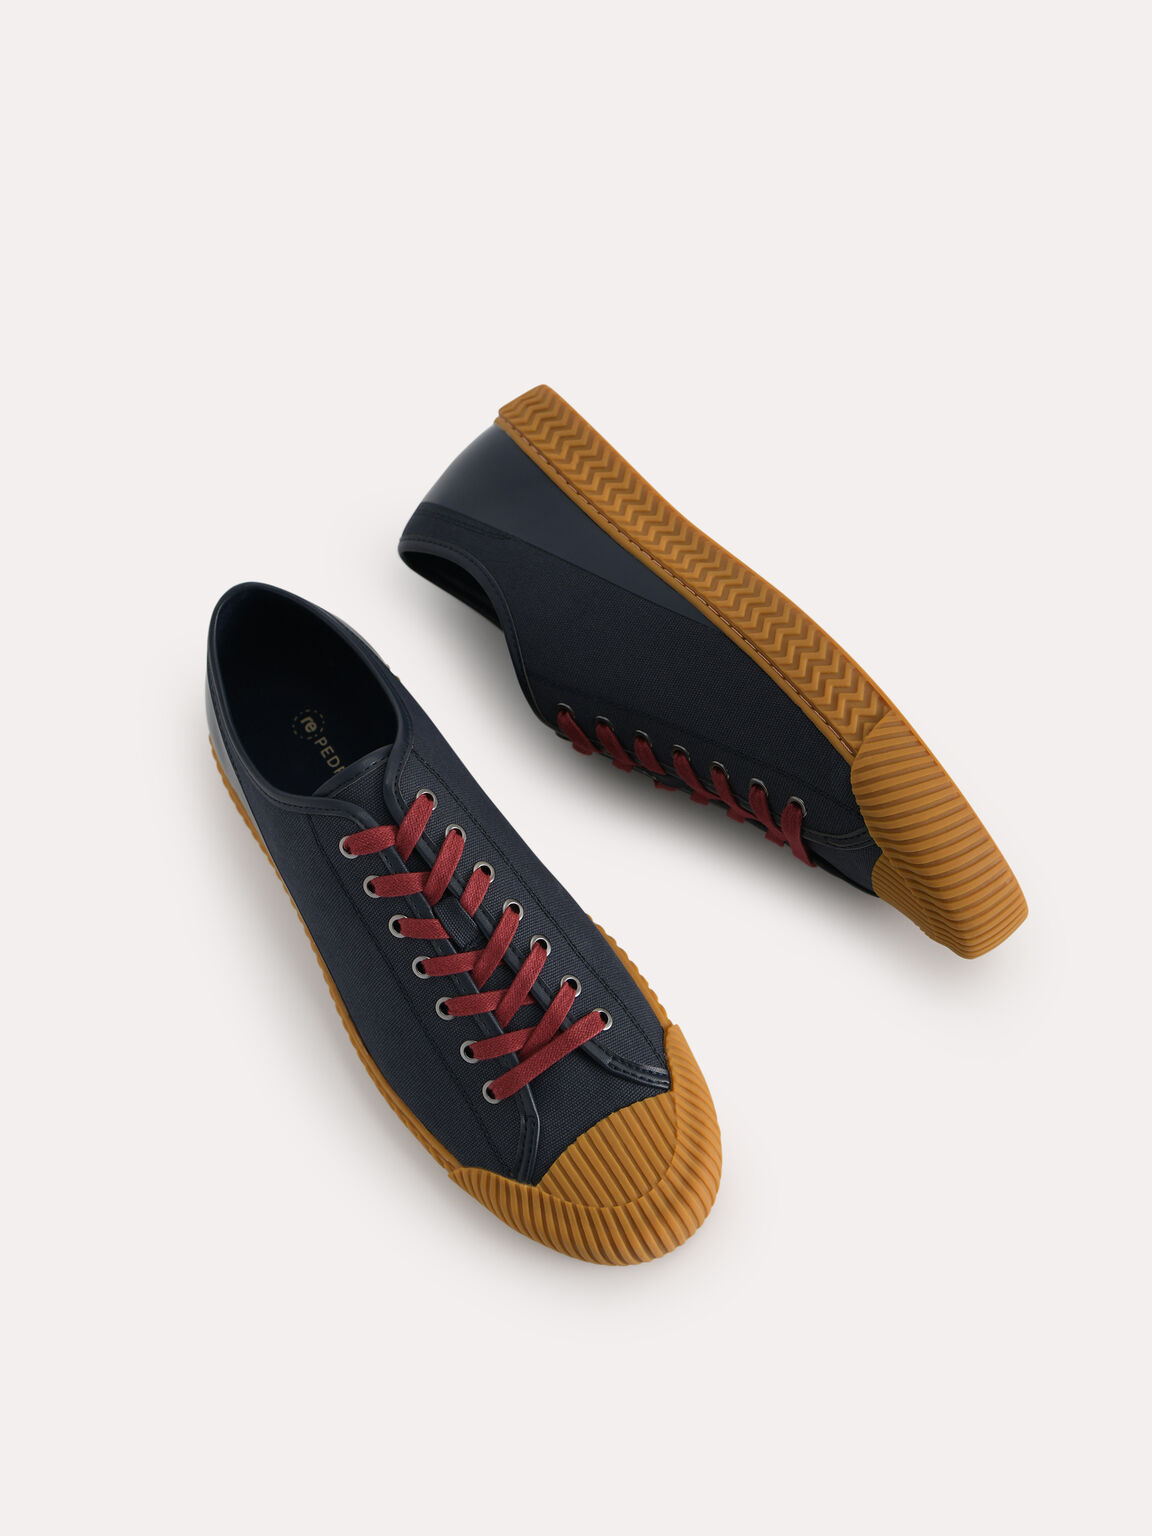 rePEDRO Lace-up Sneaker, Navy